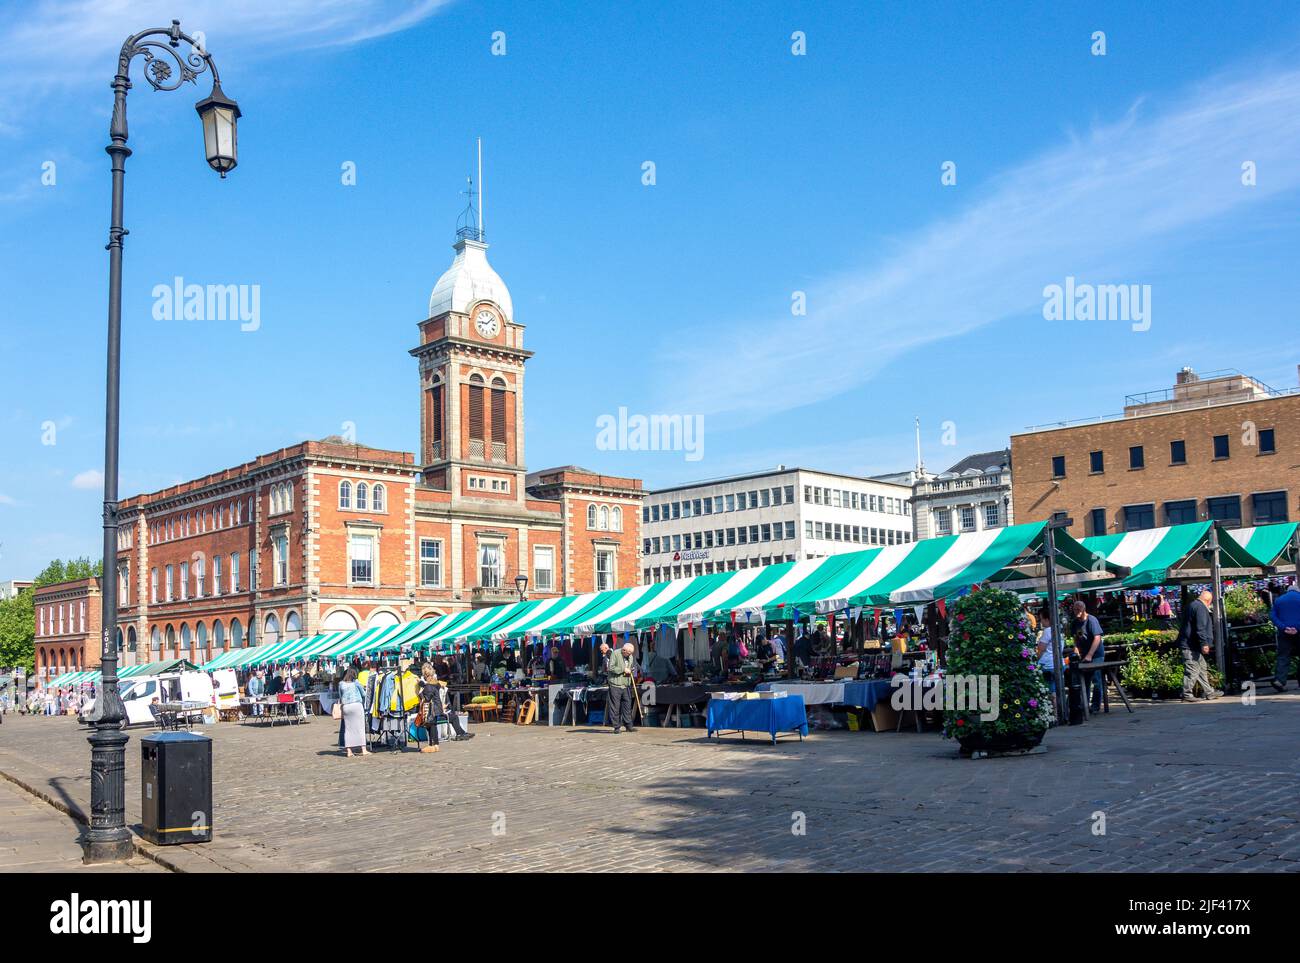 Chesterfield Market, Market Hall New Square, Chesterfield, Derbyshire, England, United Kingdom Stock Photo